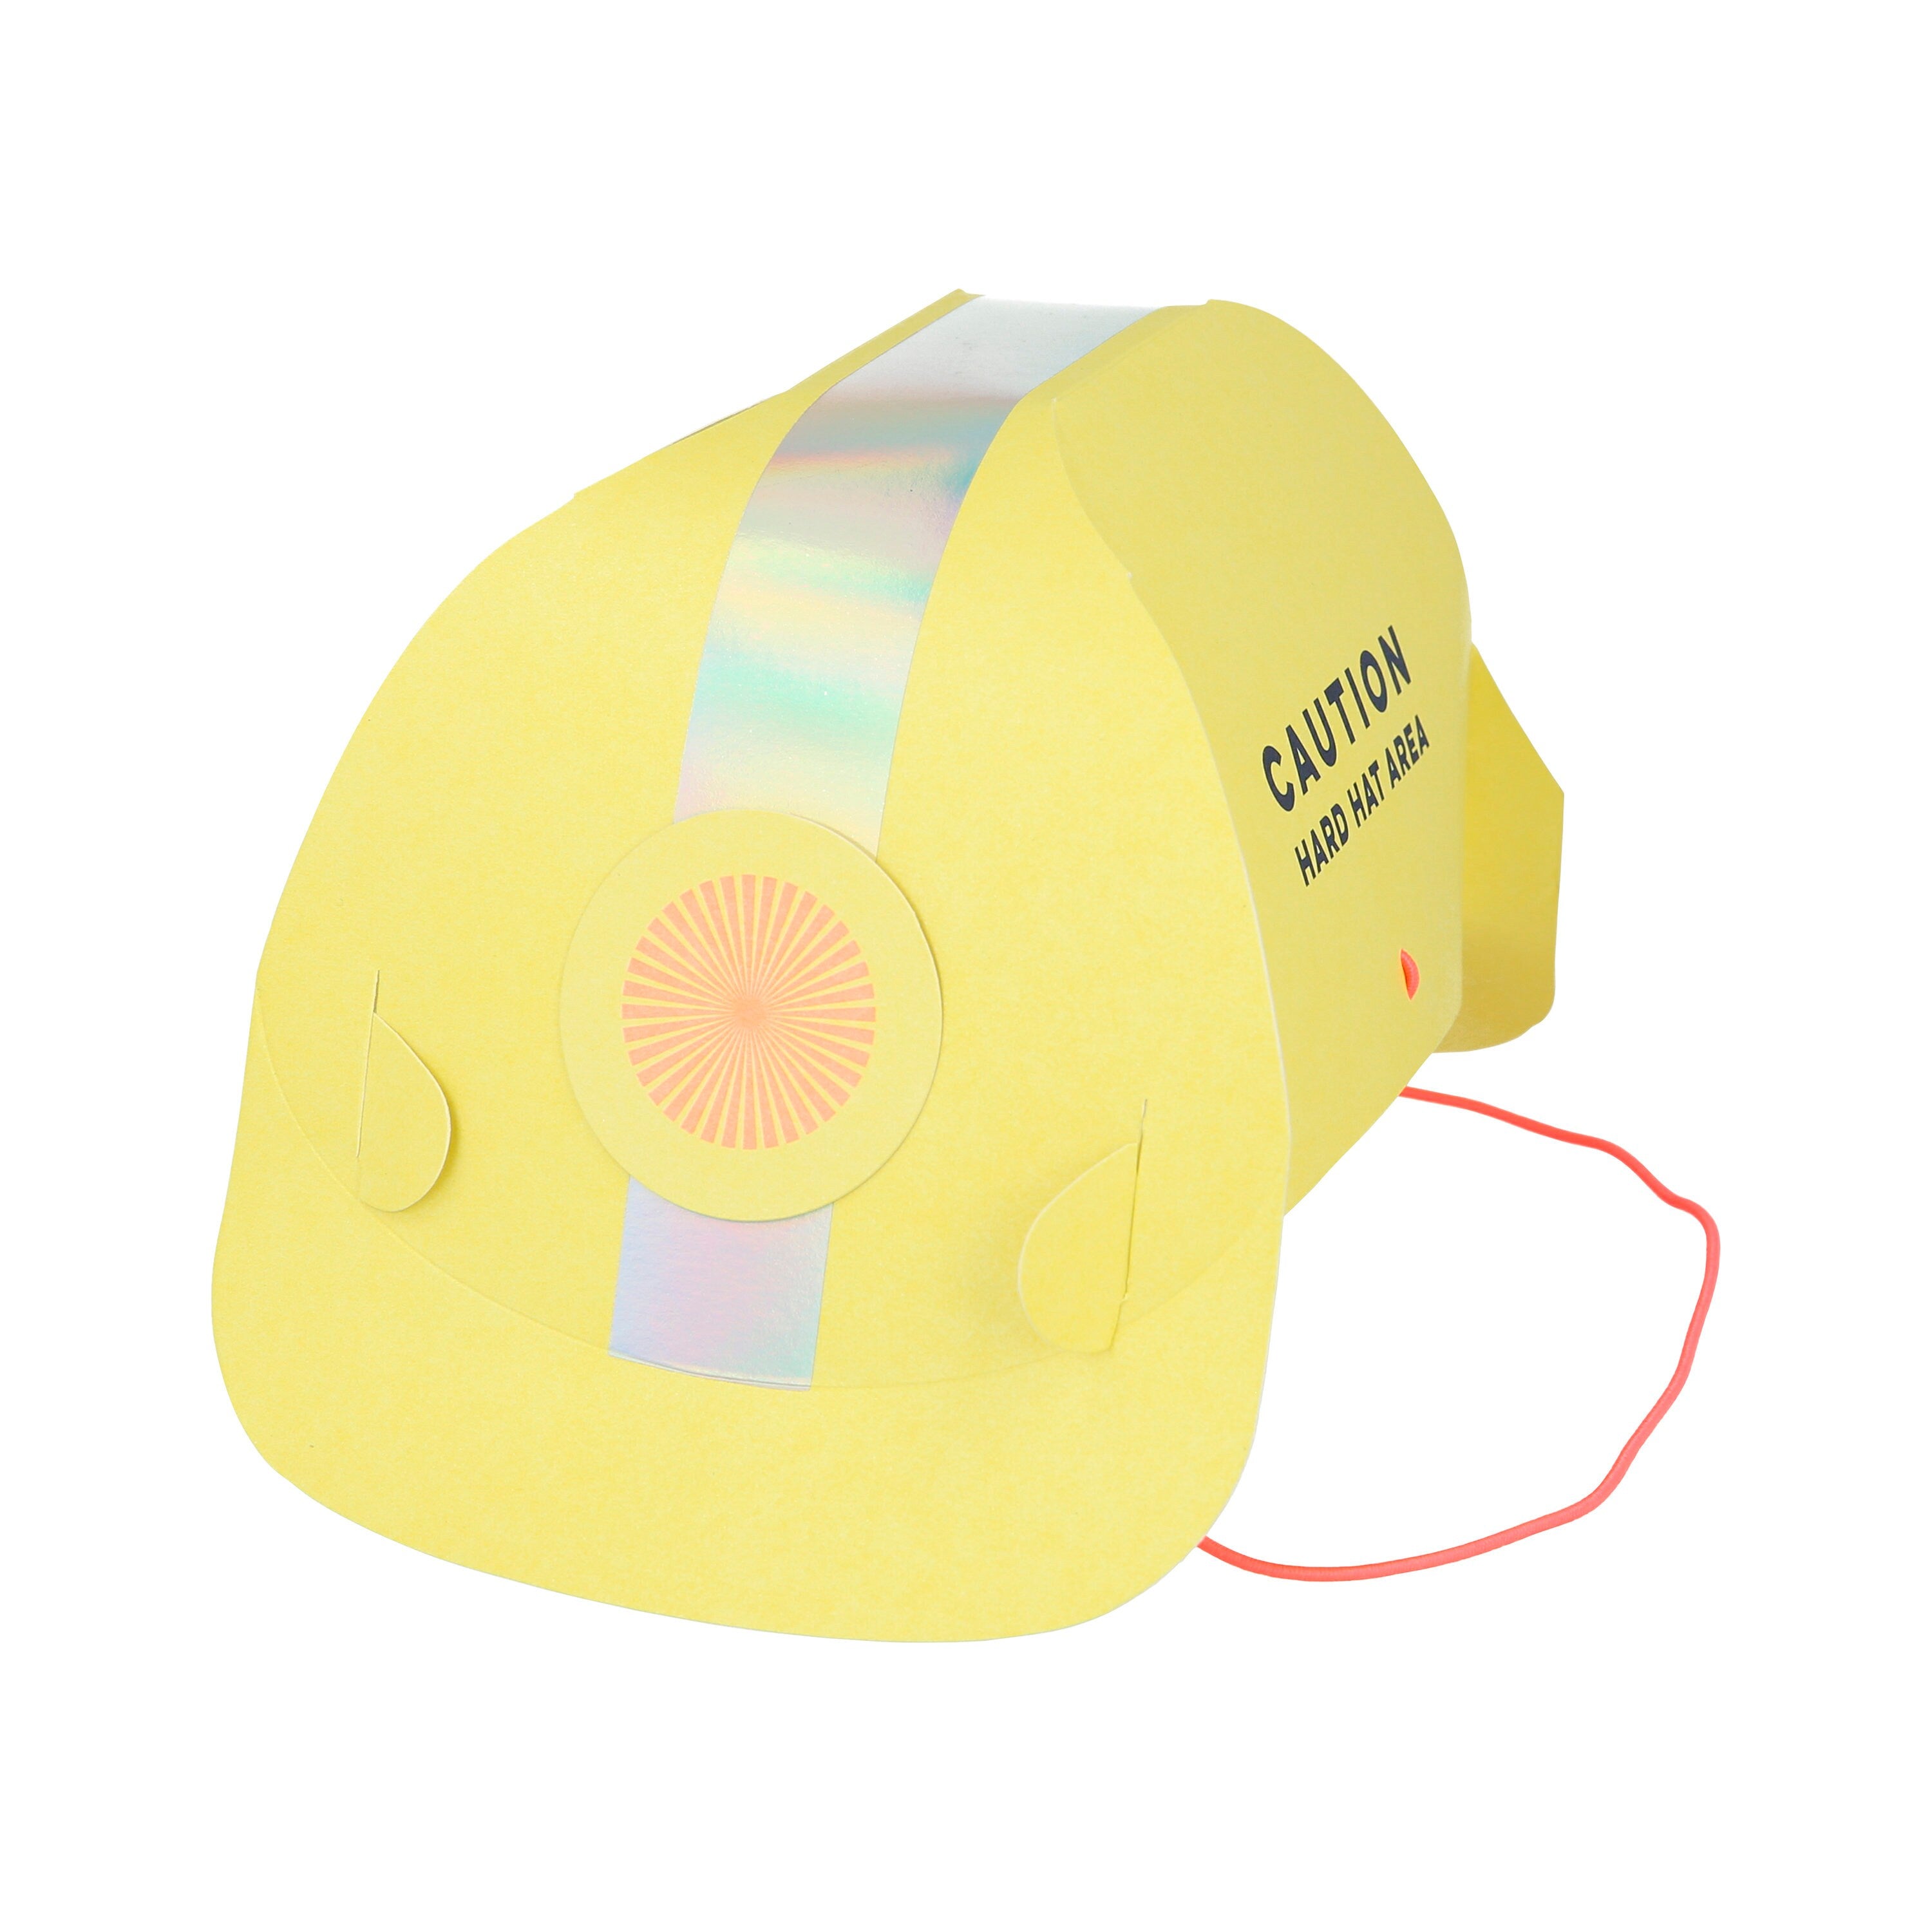 Hard Hats for Kids | Construction Party - Construction Birthday Party - Construction Theme Party - Construction Party Favor - Child Hard Hat